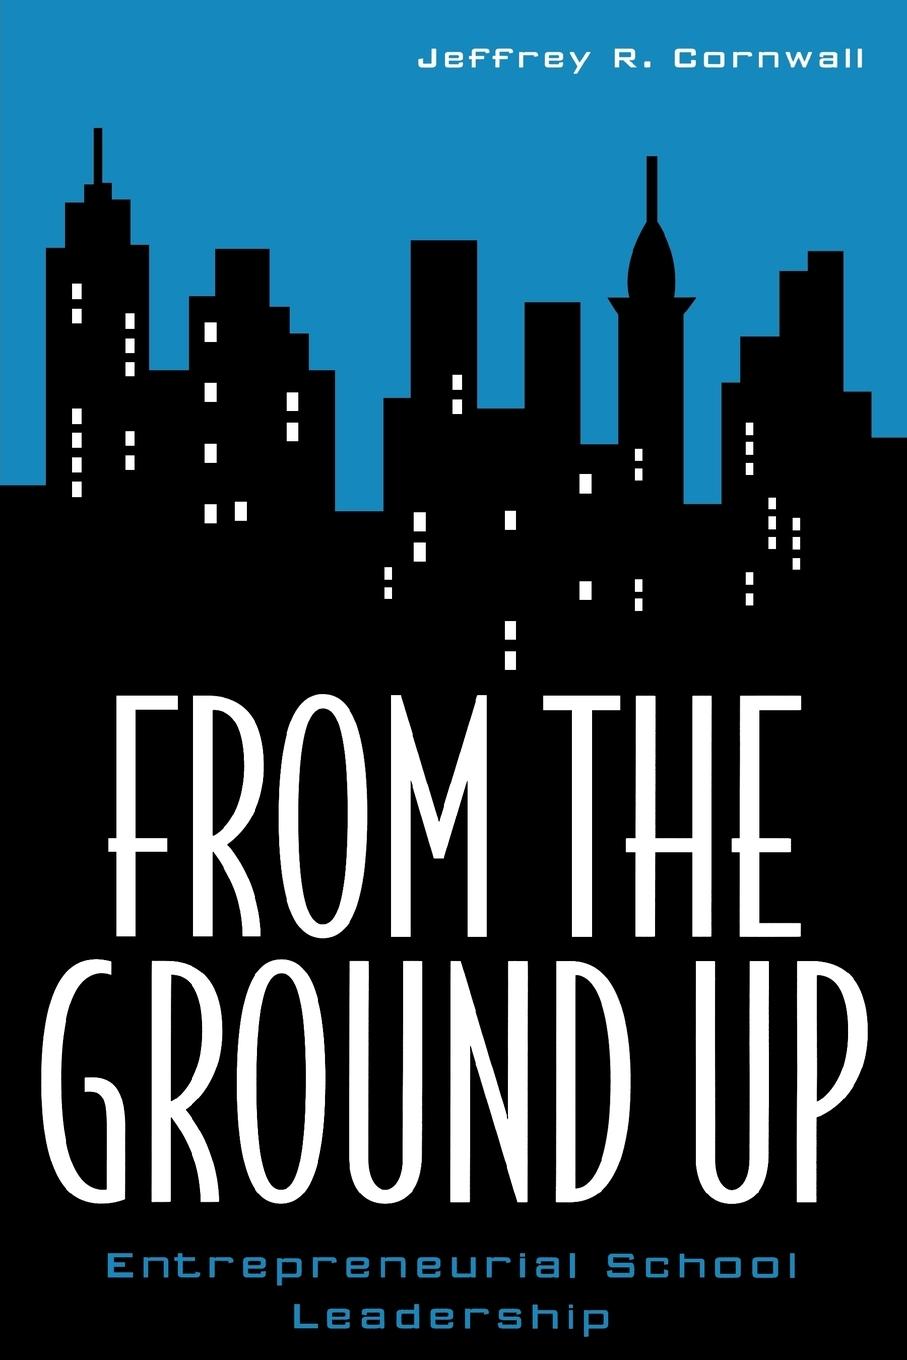 From the Ground Up - Cornwall, Jeffrey R.